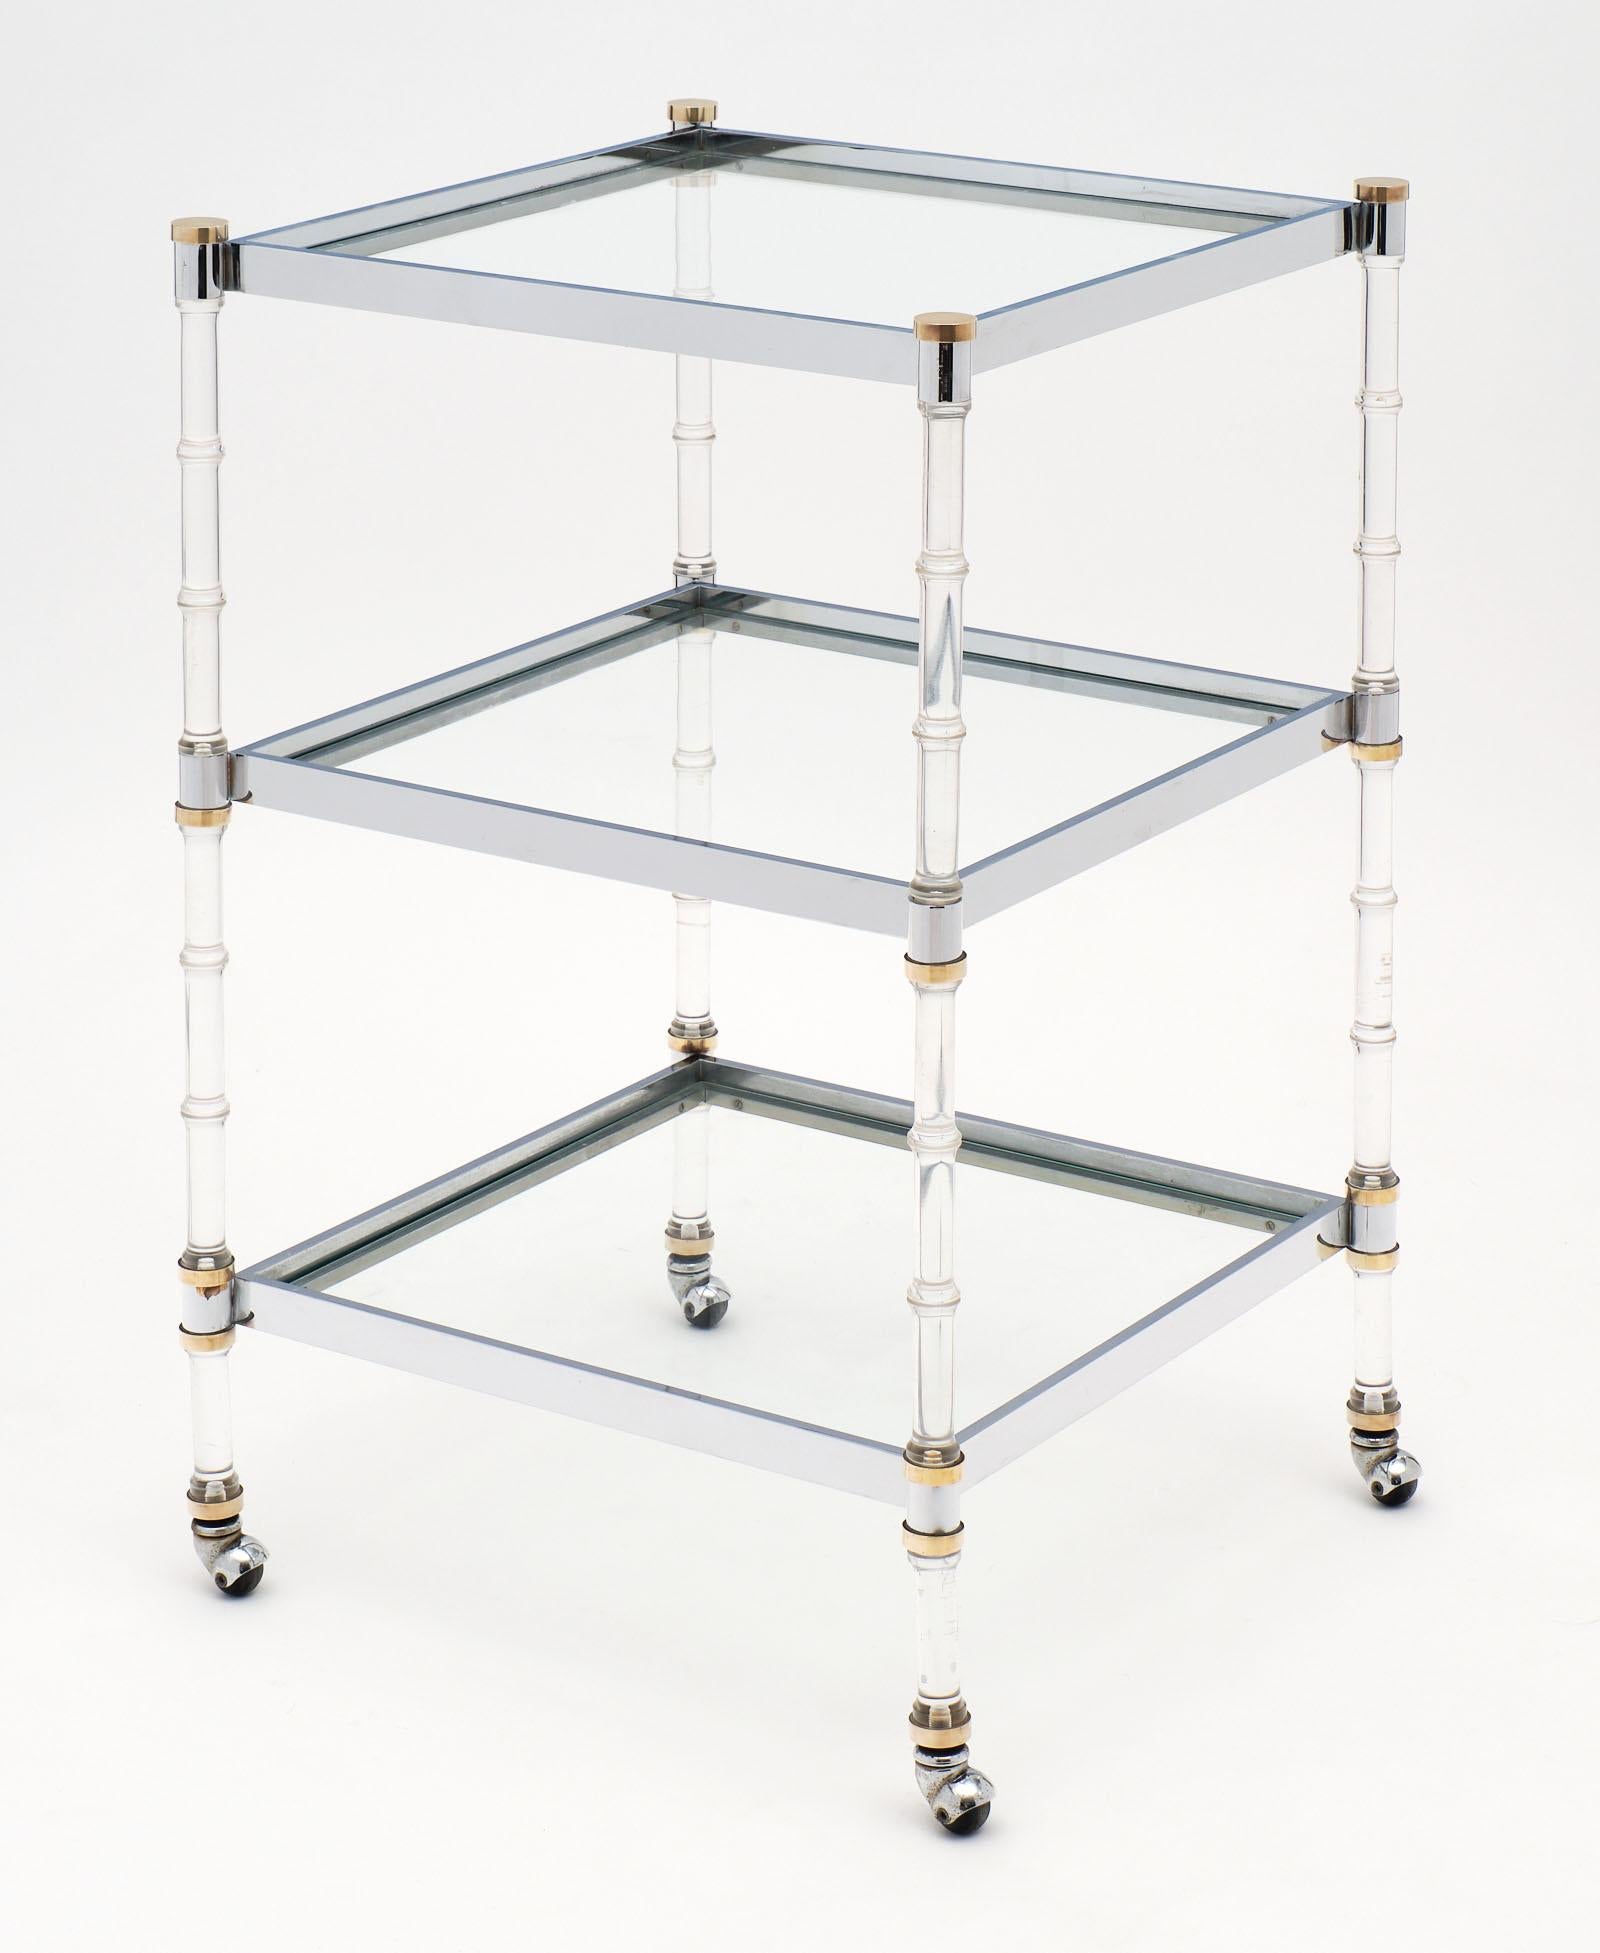 Three tiered modernist French bar cart with unique details and original wheels. This piece is made of Lucite, chrome and brass. We loved the strong structure in great condition and the flawless combination of materials. The shelves themselves are